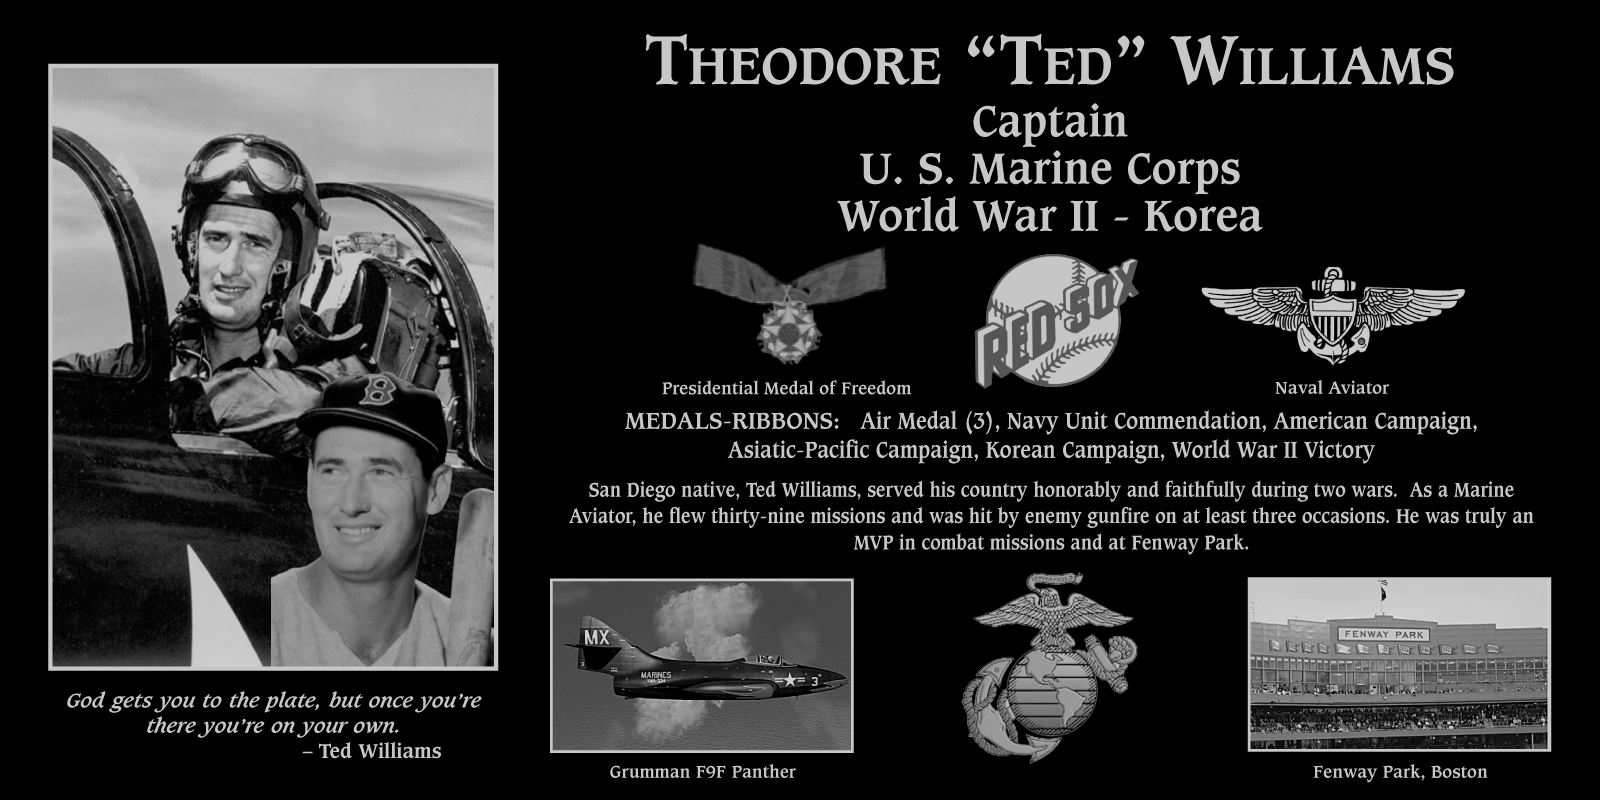 Theodore “Ted” Williams